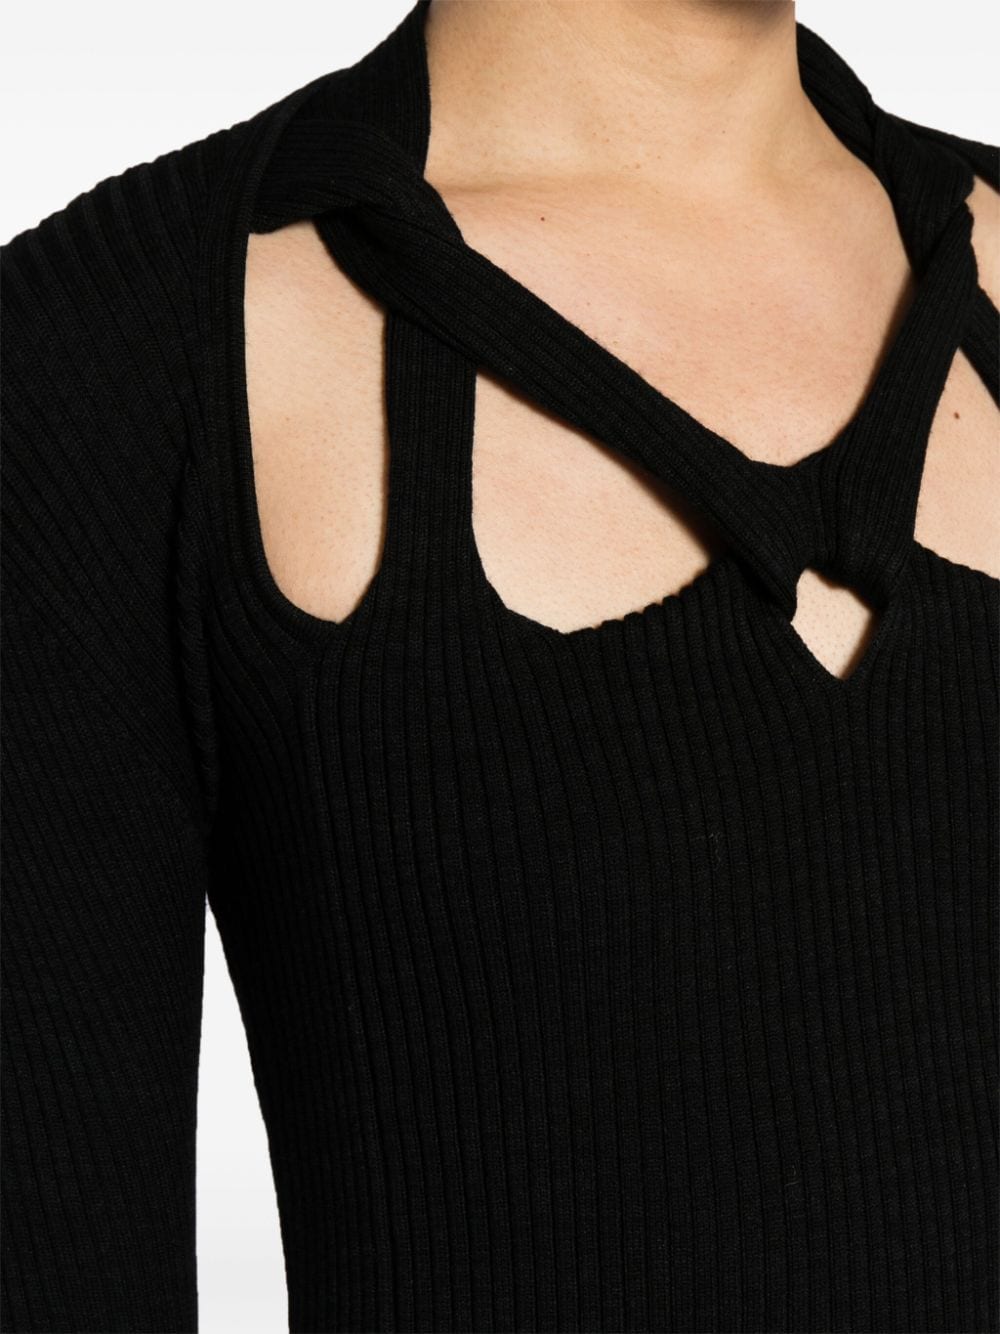 Cut-out rib-knit top<BR/><BR/><BR/>